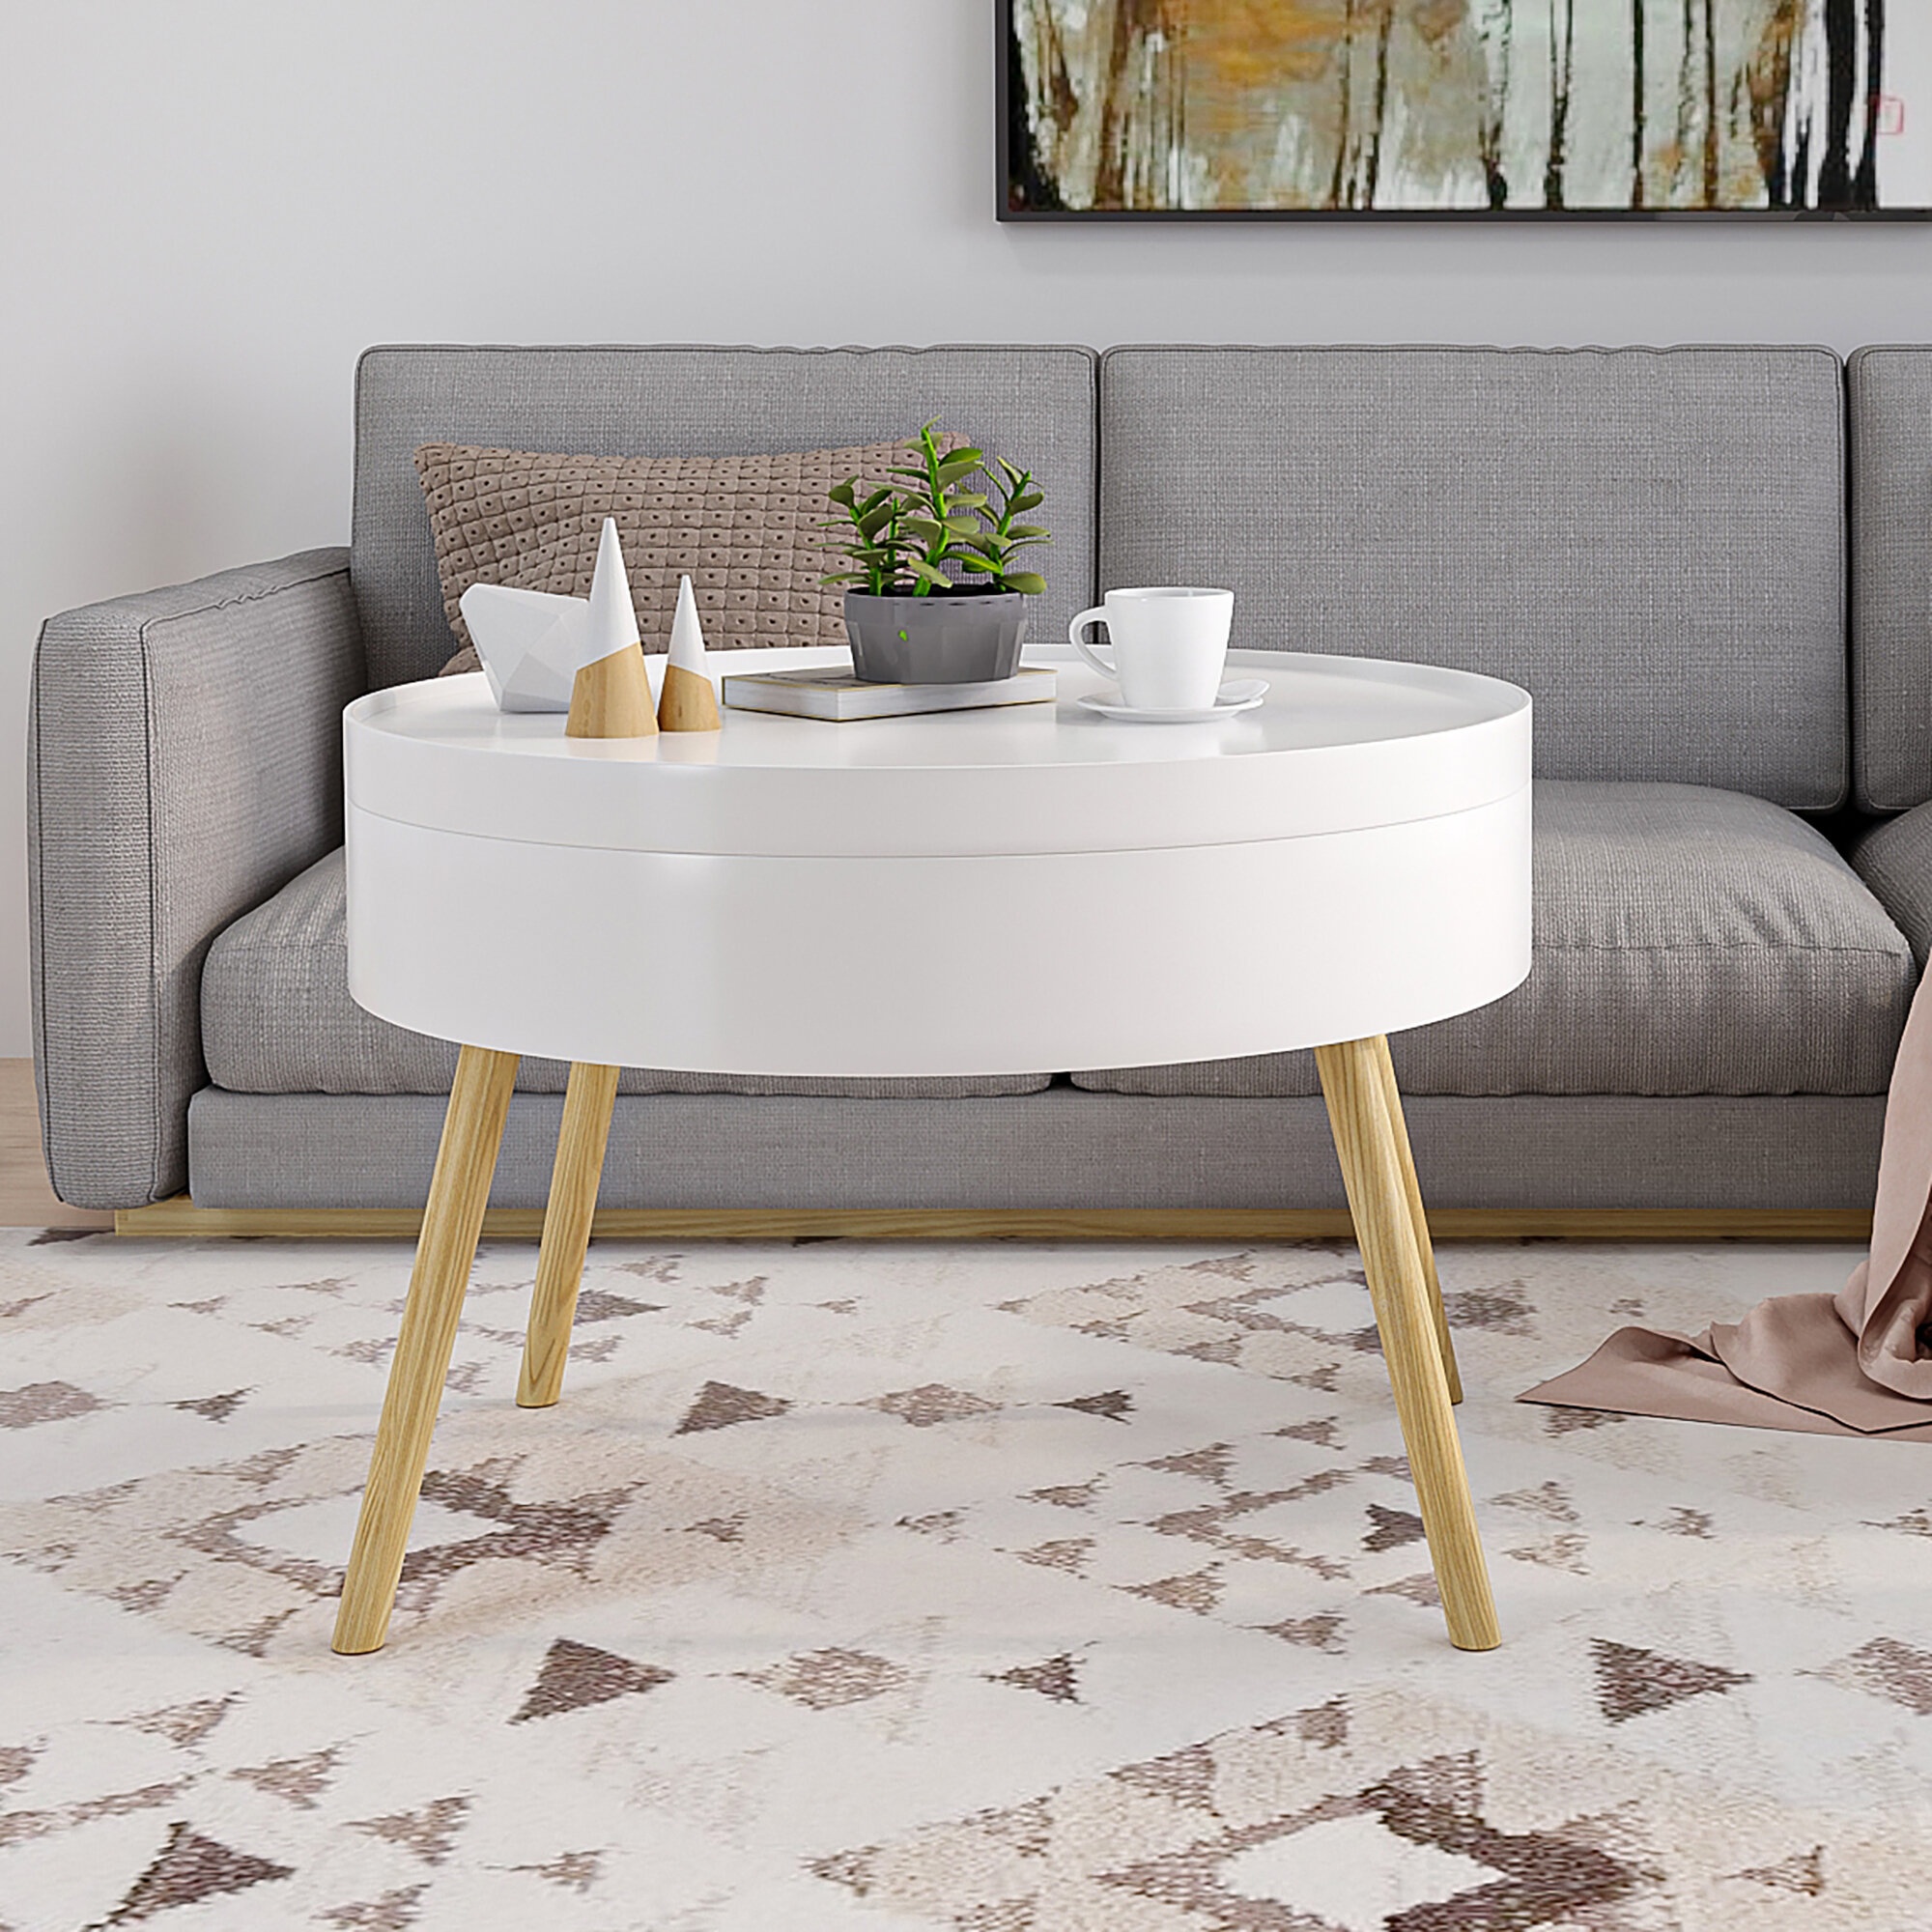 Coffee Table For Small Space - VisualHunt